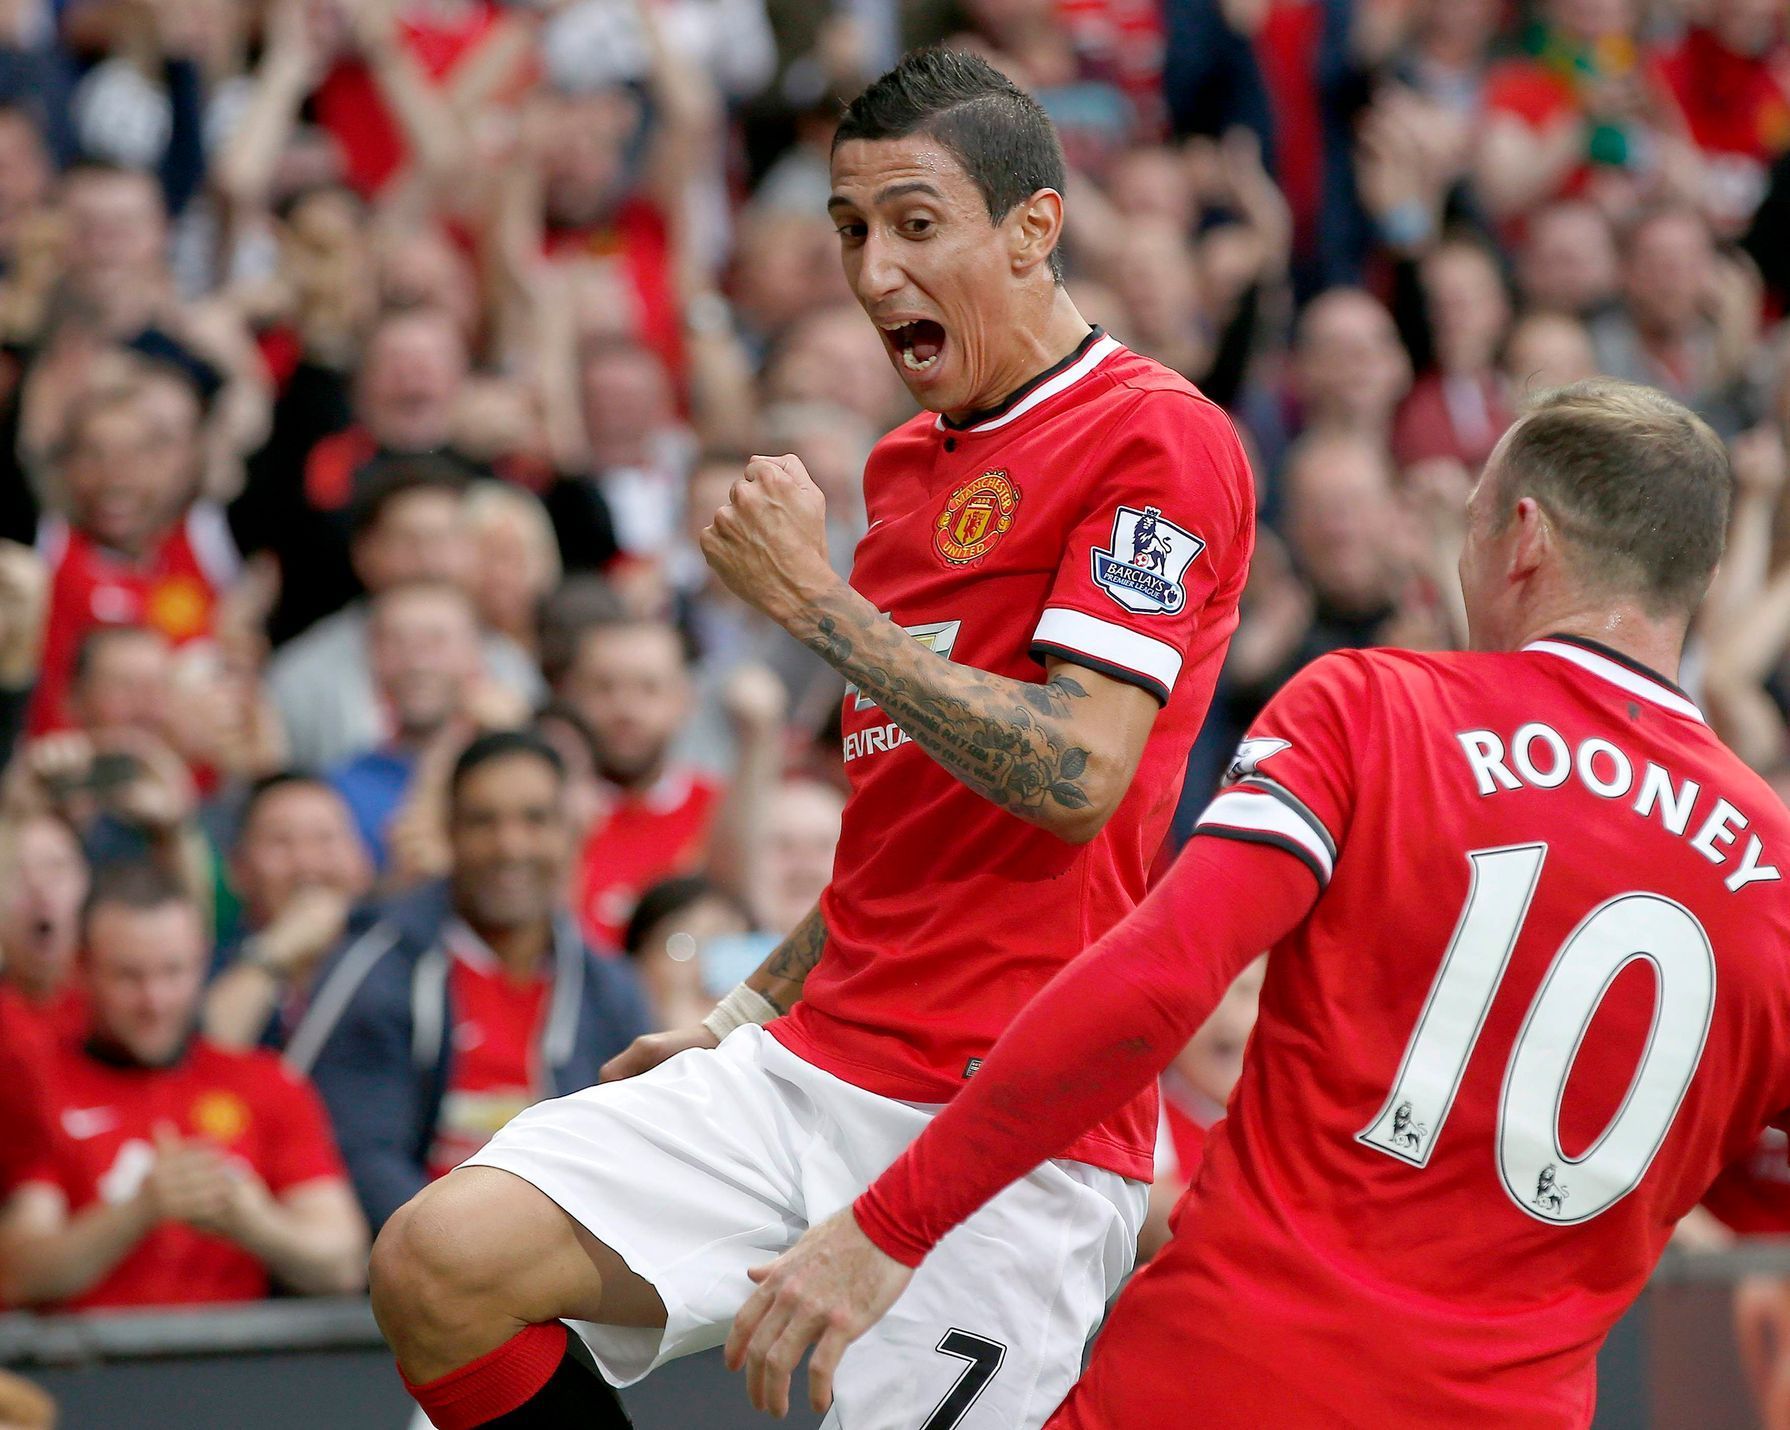 Manchester United's Di Maria celebrates with teammate Rooney after scoring a goal against Queens Park Rangers during their English Premier League soccer match at Old Trafford in Manchester